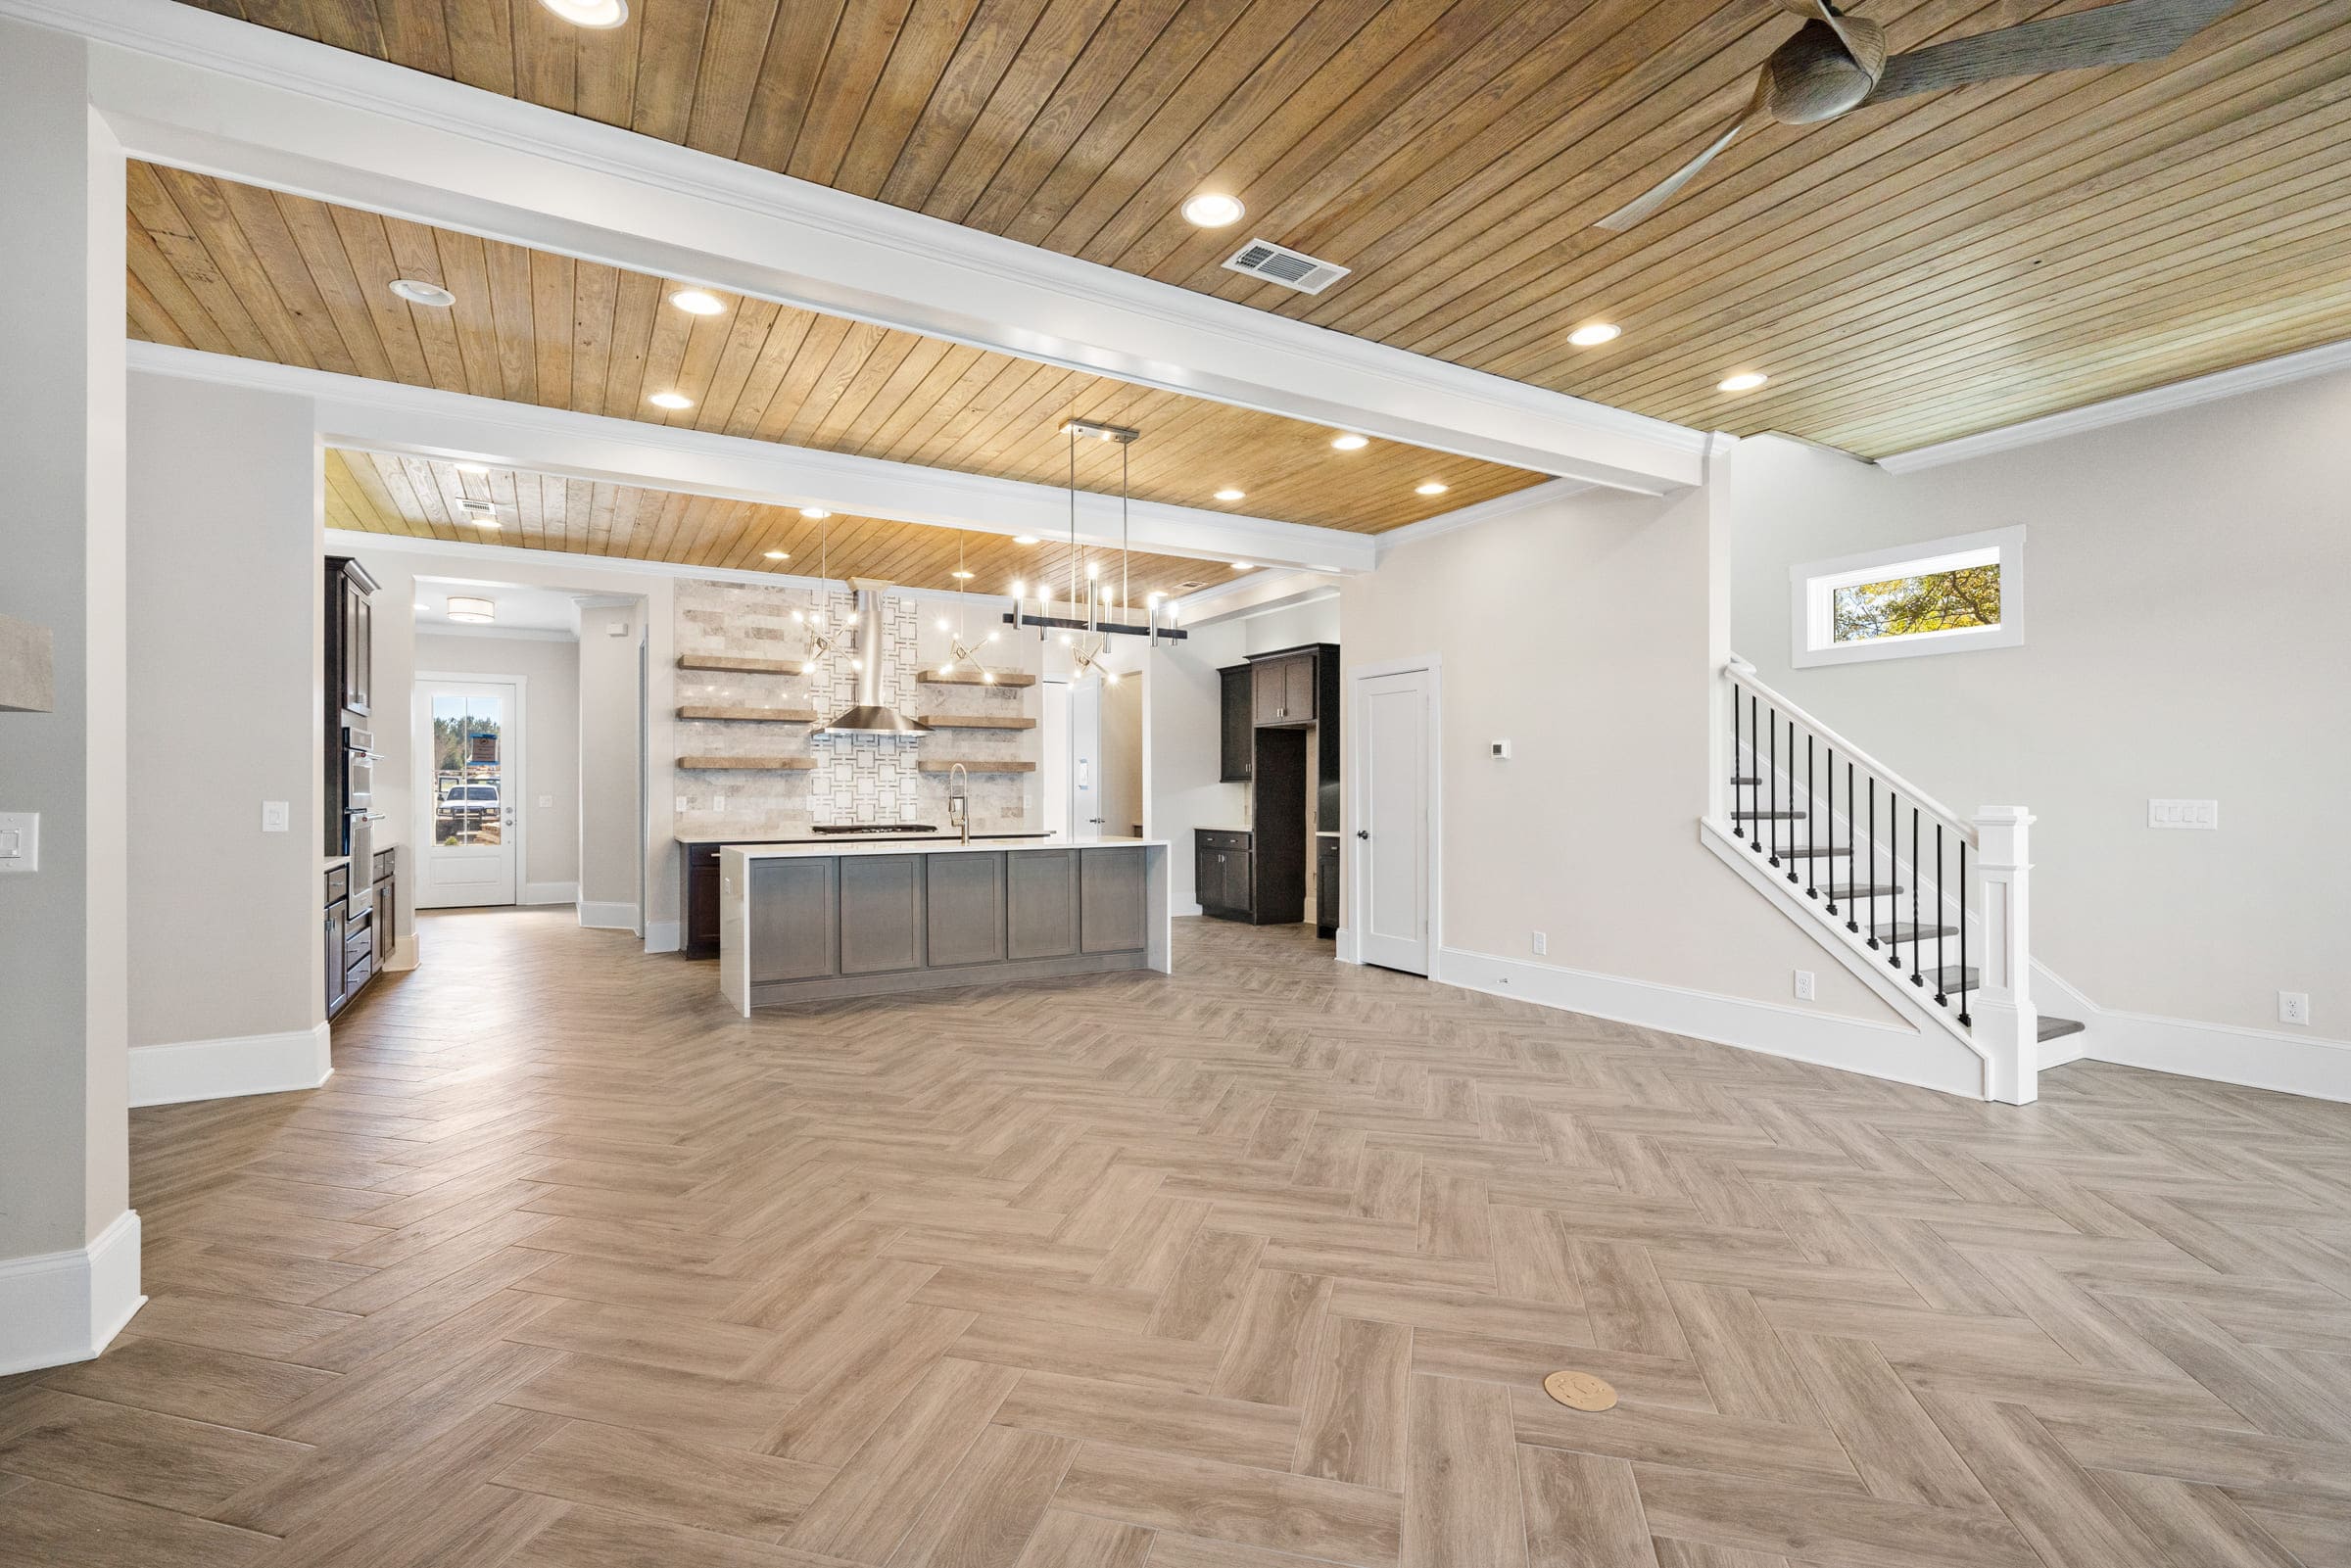 Detailed Hardwood Floor with Gorgeous View of Downstairs Kitchen Area  